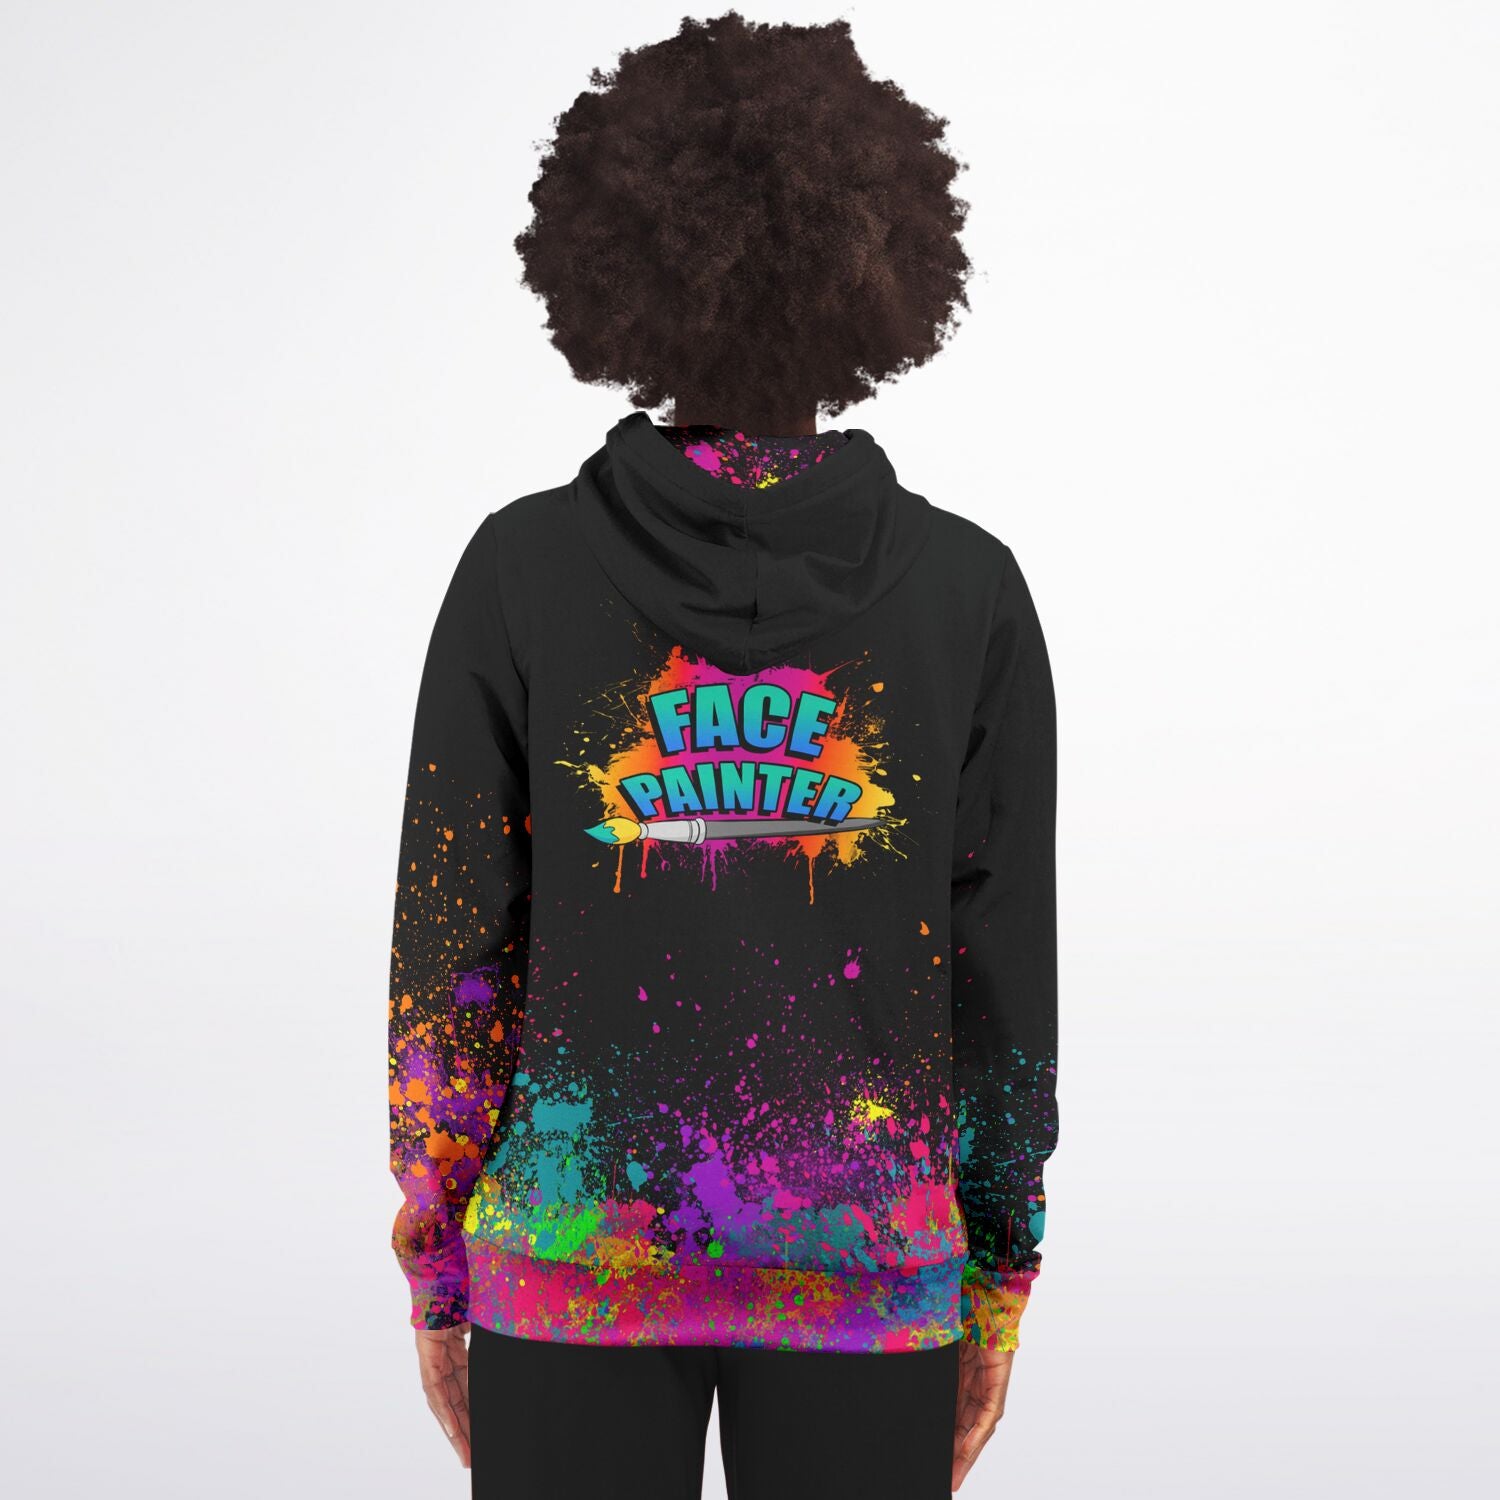 Zip Hoodie for face painters and entertainers